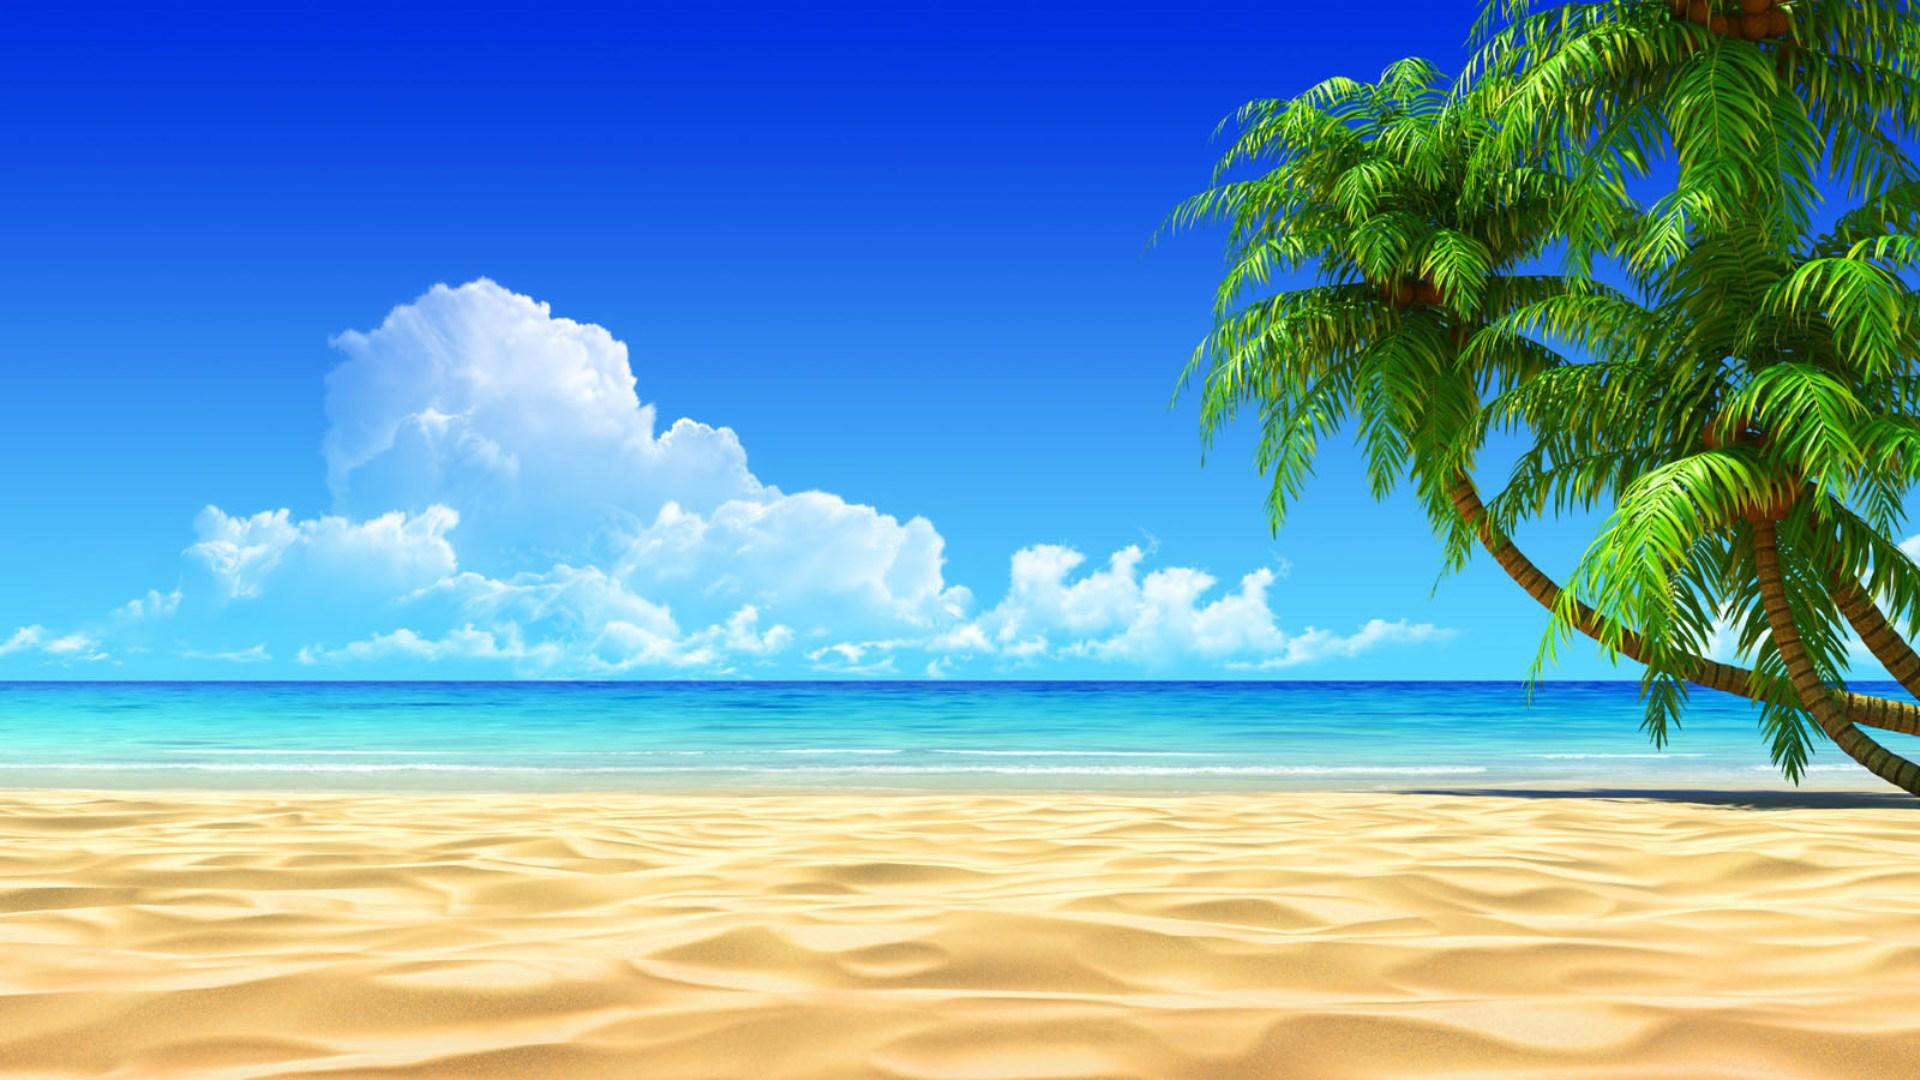 background picture download